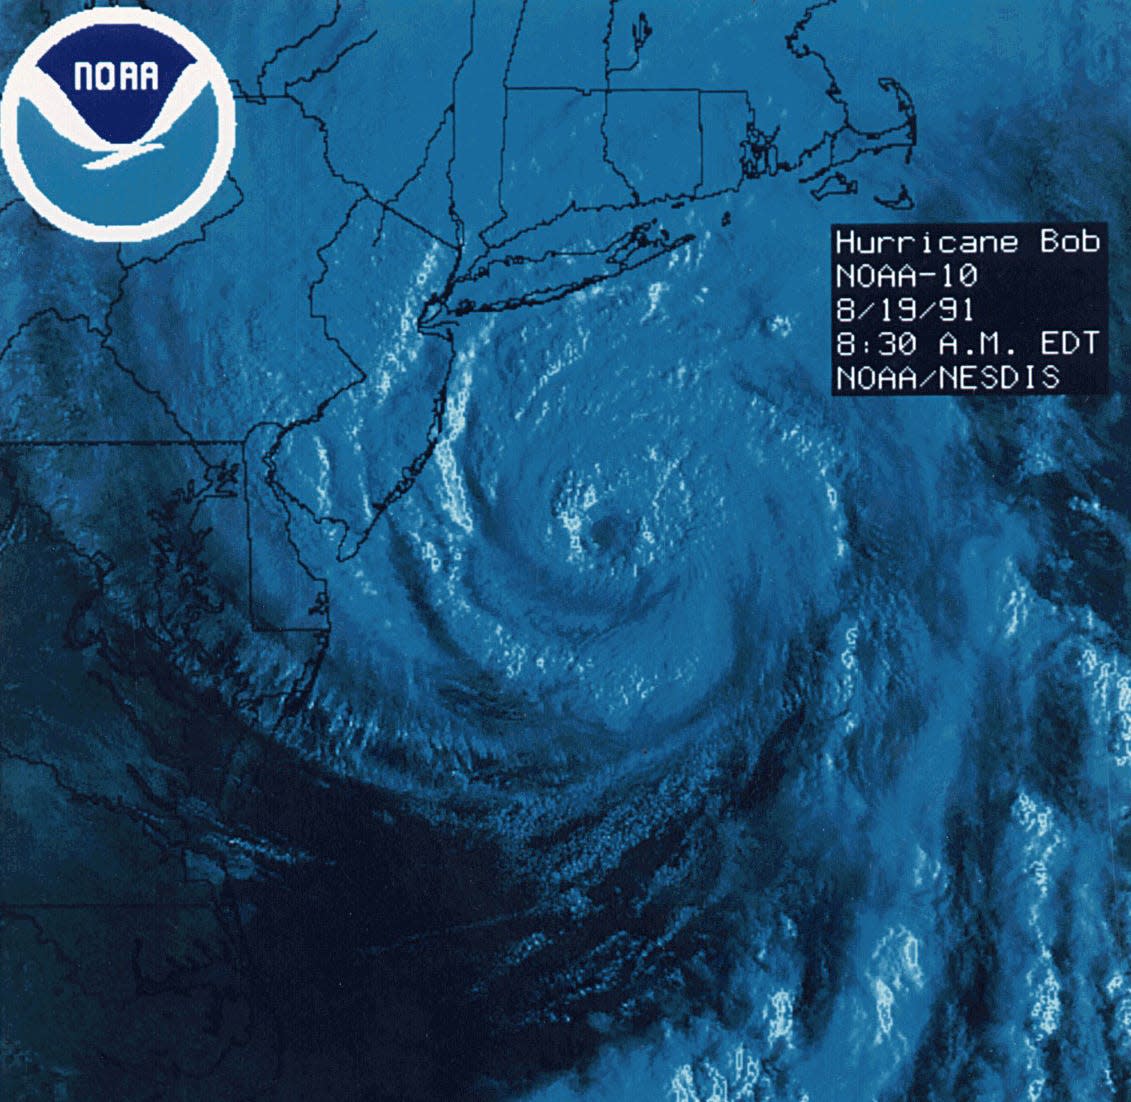 This National Oceanic and Atmospheric Administration image shows Hurricane Bob at 8:30 a.m. on Aug. 19, 1991 as it approached Cape Cod.